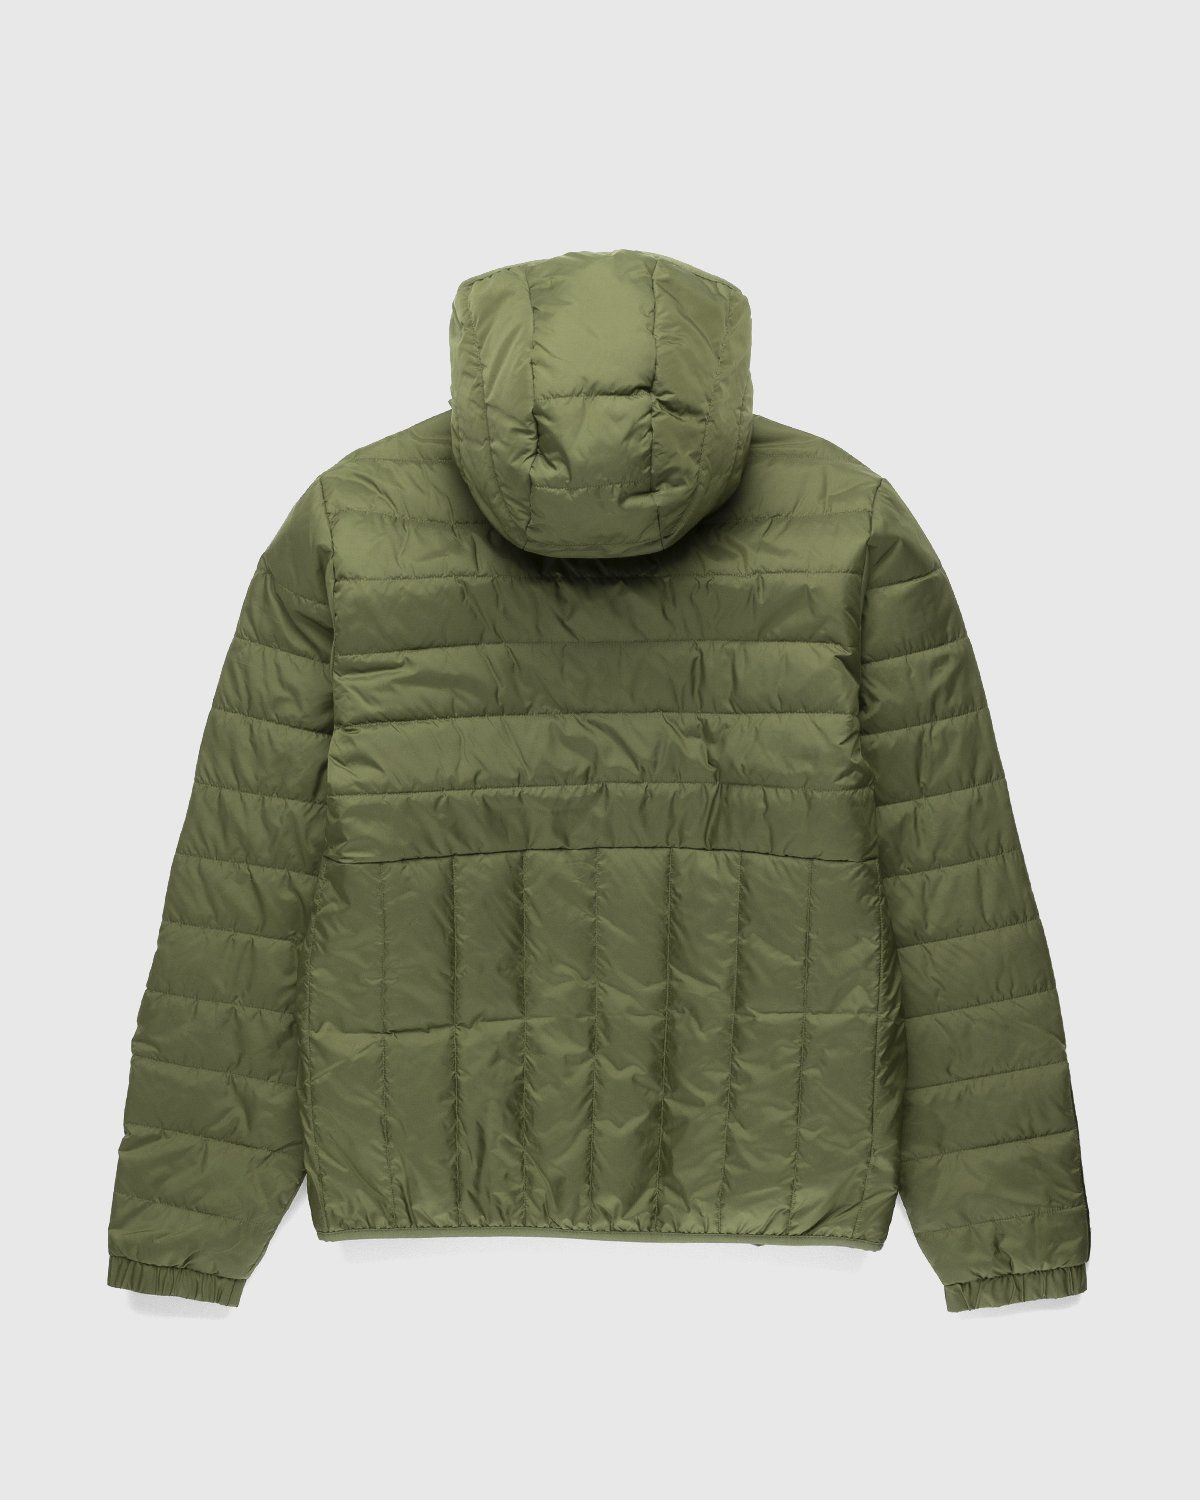 Adidas – Itavic 3-Stripes Midweight Hooded Jacket Olive - Outerwear - Green - Image 2